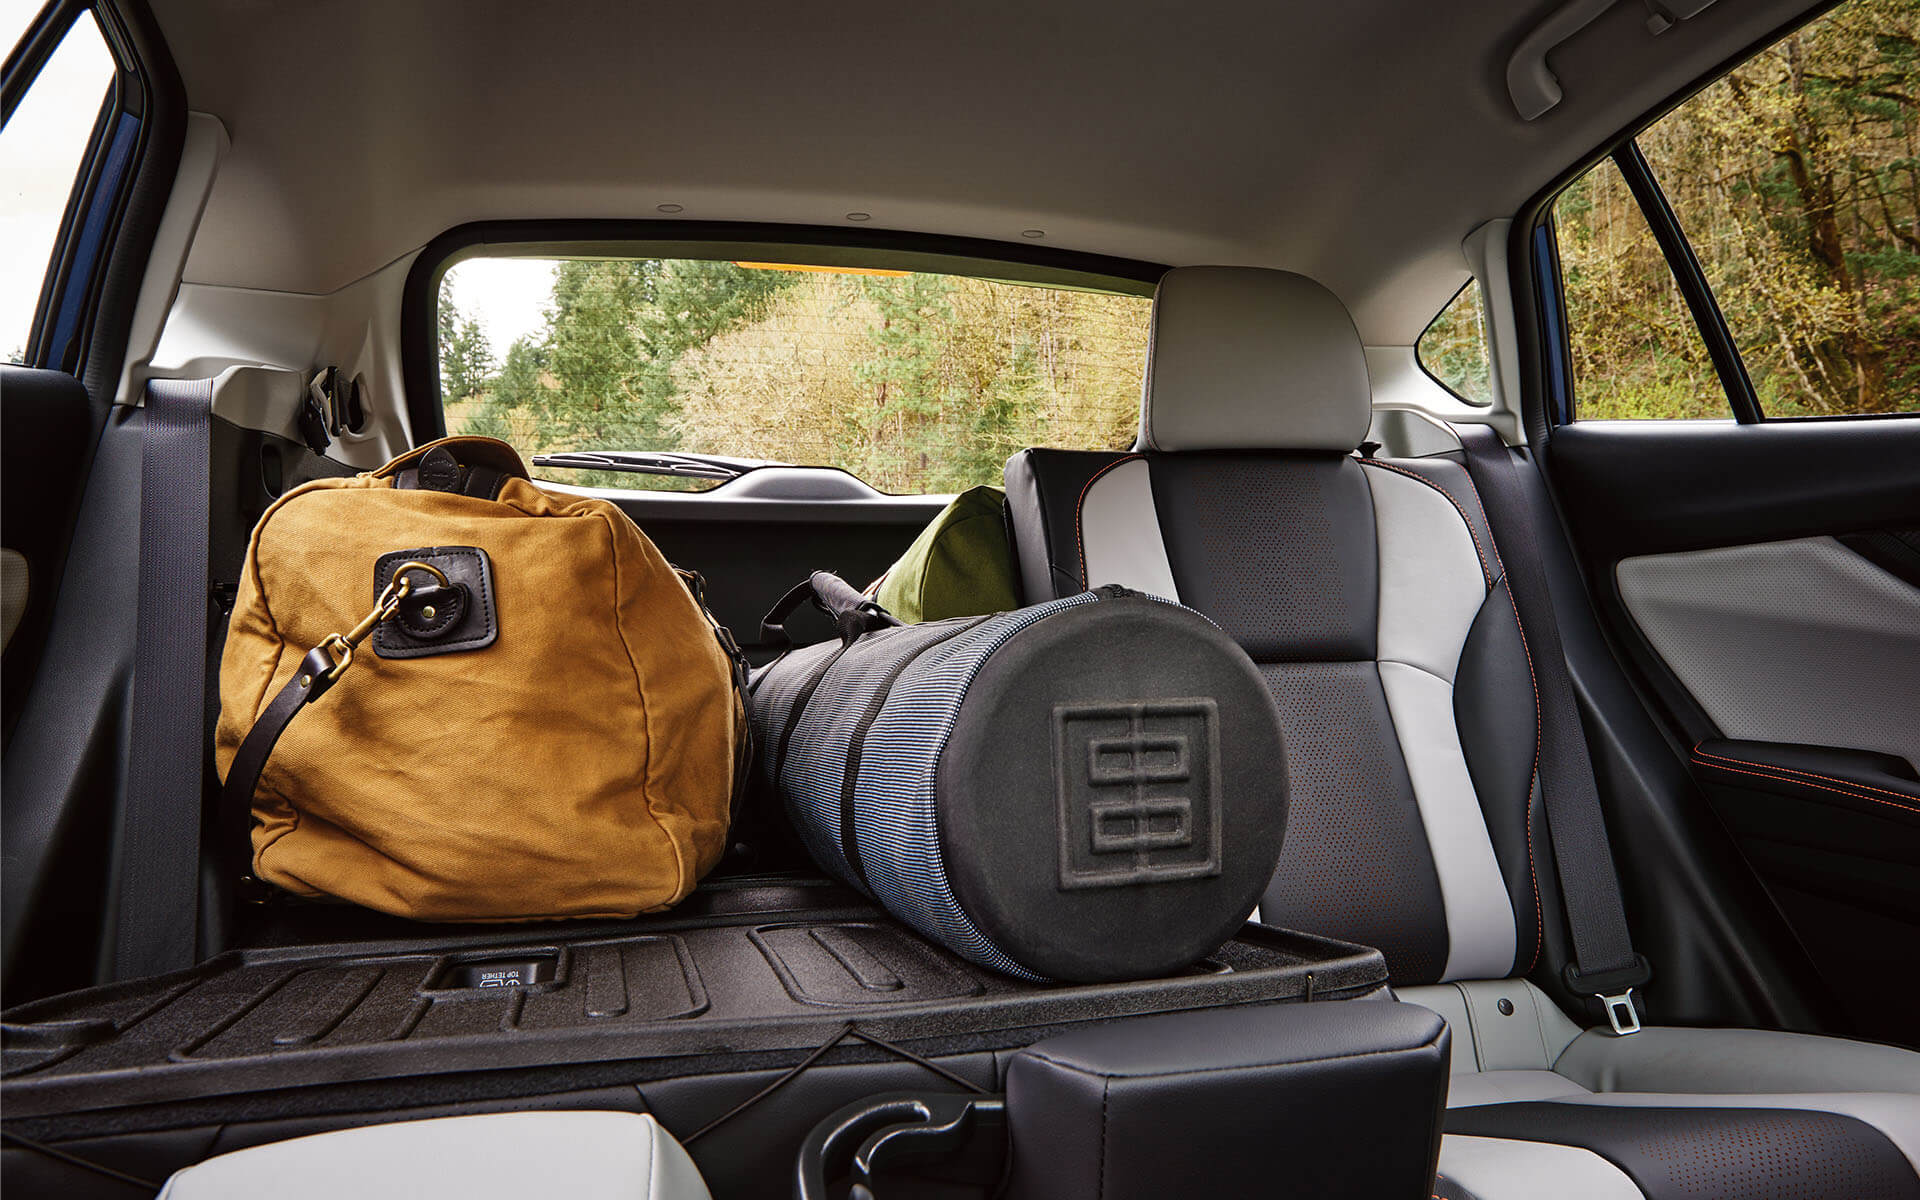 Luggage in the rear cargo area of a Subaru Crosstrek with a seat folded down